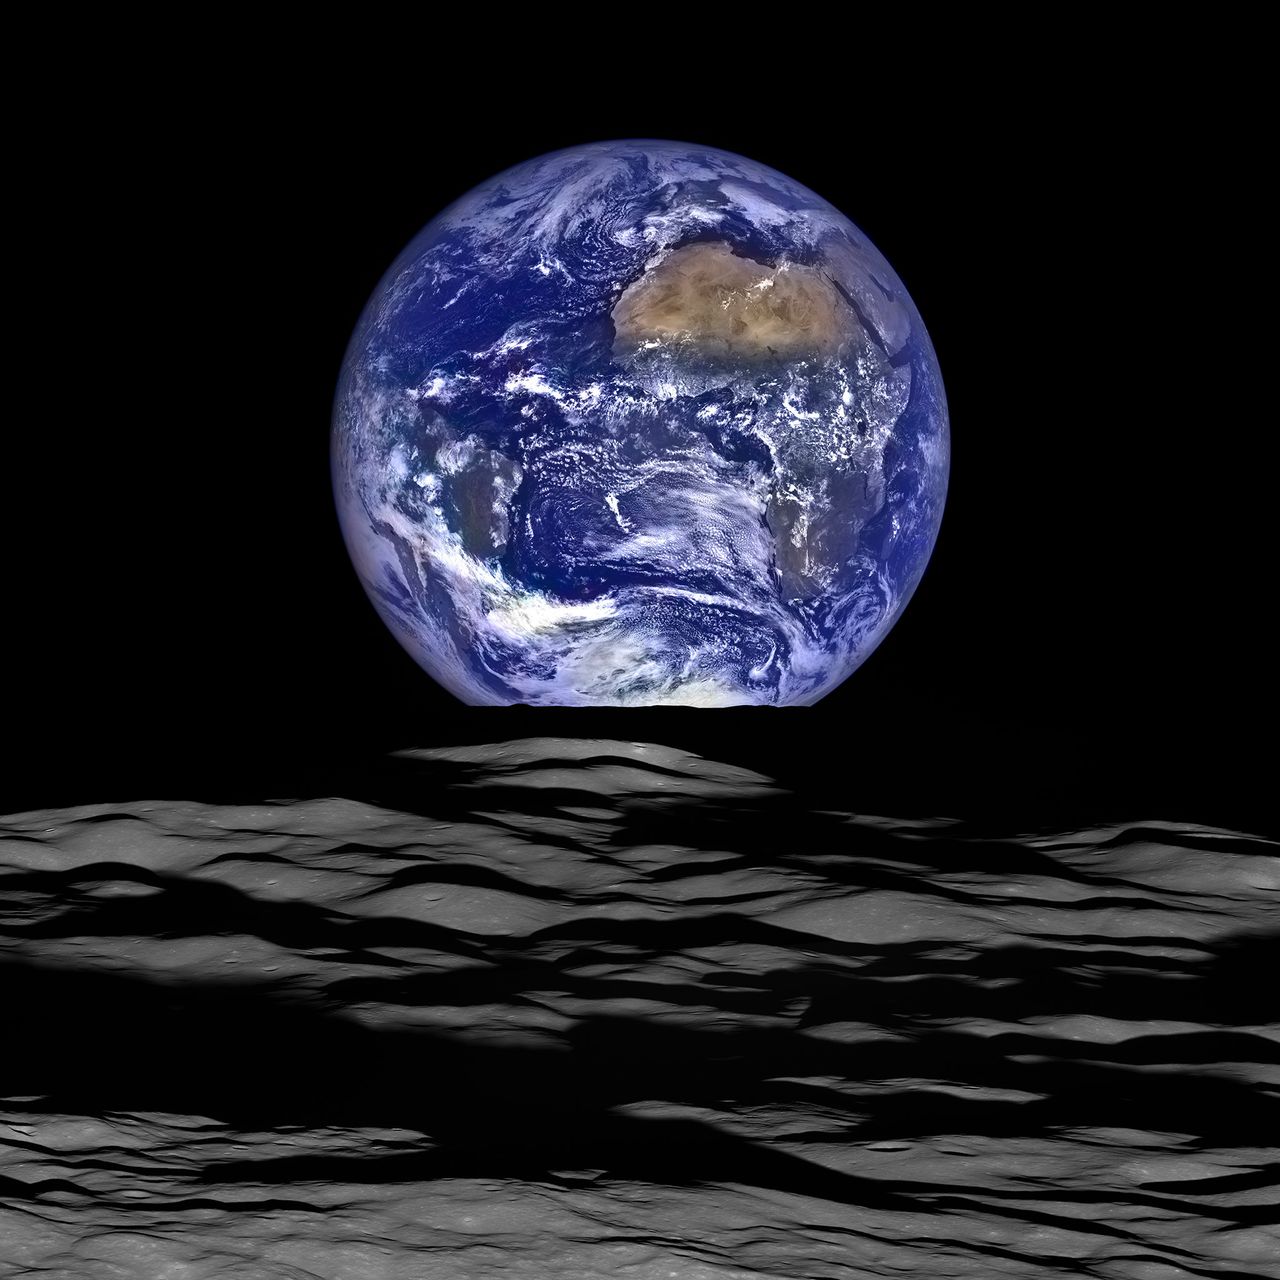 NASA's Lunar Reconnaissance Orbiter captured a unique view of Earth from the spacecraft's orbit around the moon.